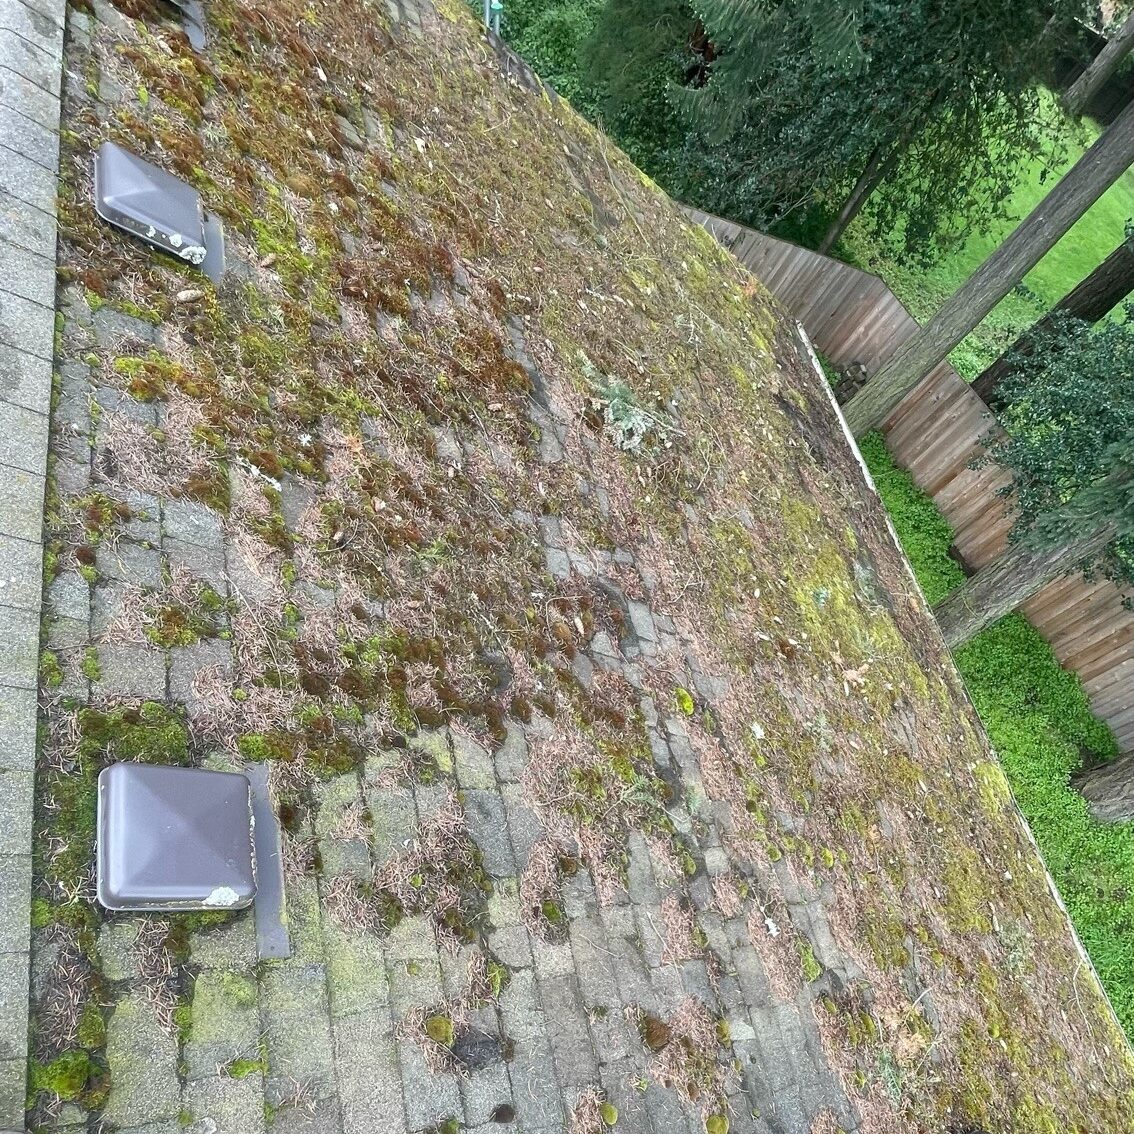 Aerial view of a moss-covered roof with two skylights, surrounded by trees.